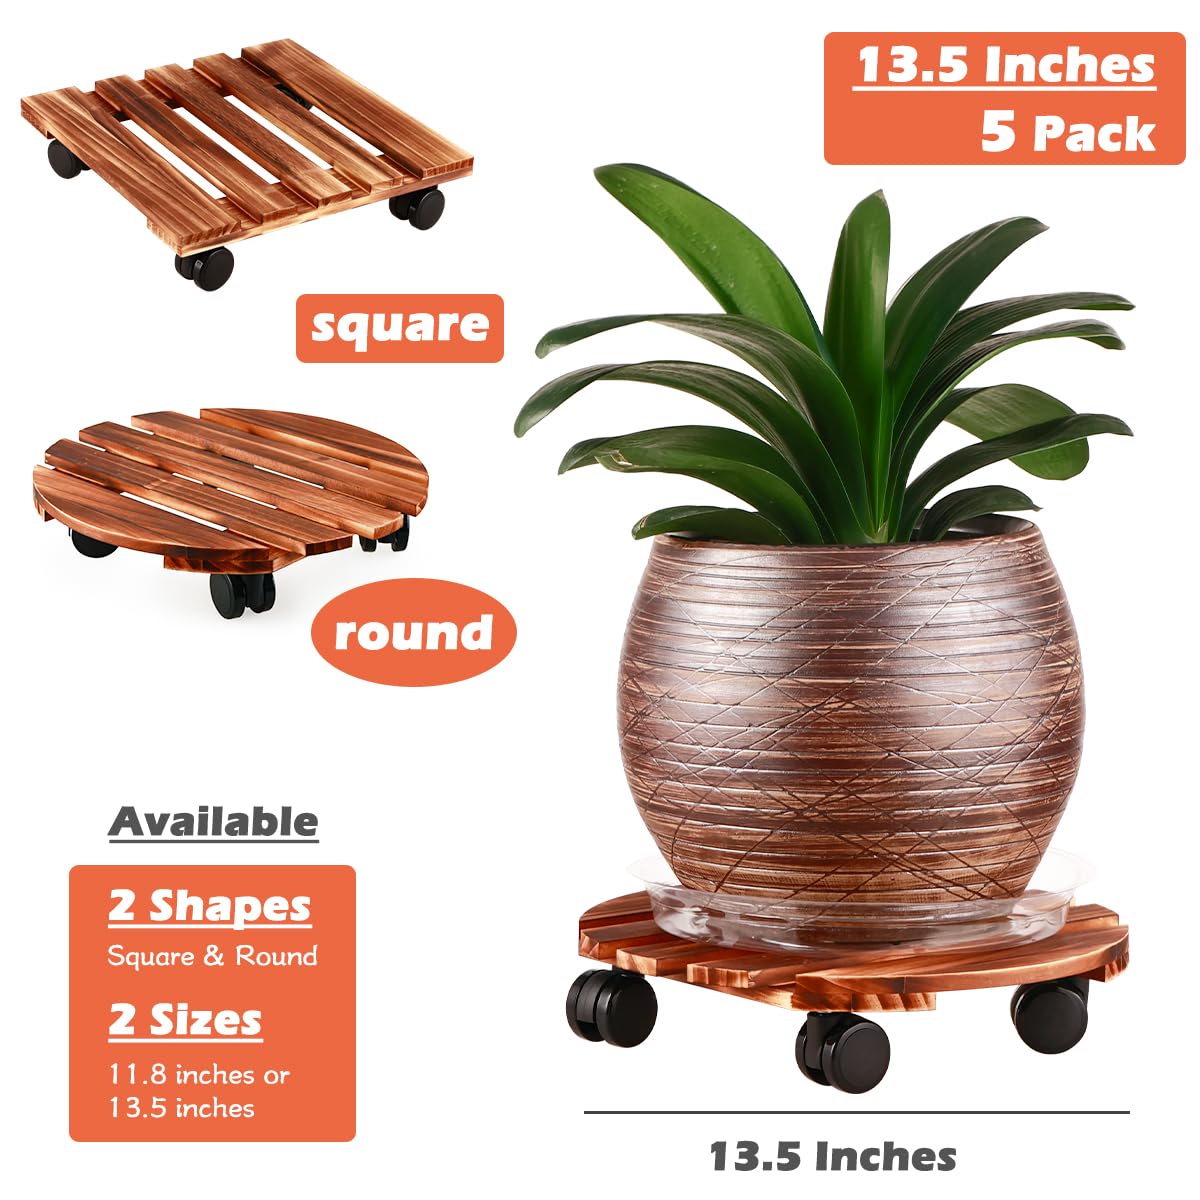 3 Pack Plant Caddy with Wheels Heavy Duty 13.5 Inch Wooden Plant Stand with Wheels Plant Dolly Rolling Plant Stand Plant Roller with Casters for Indoor and Outdoor with 3 Pack Plant Saucers, Round